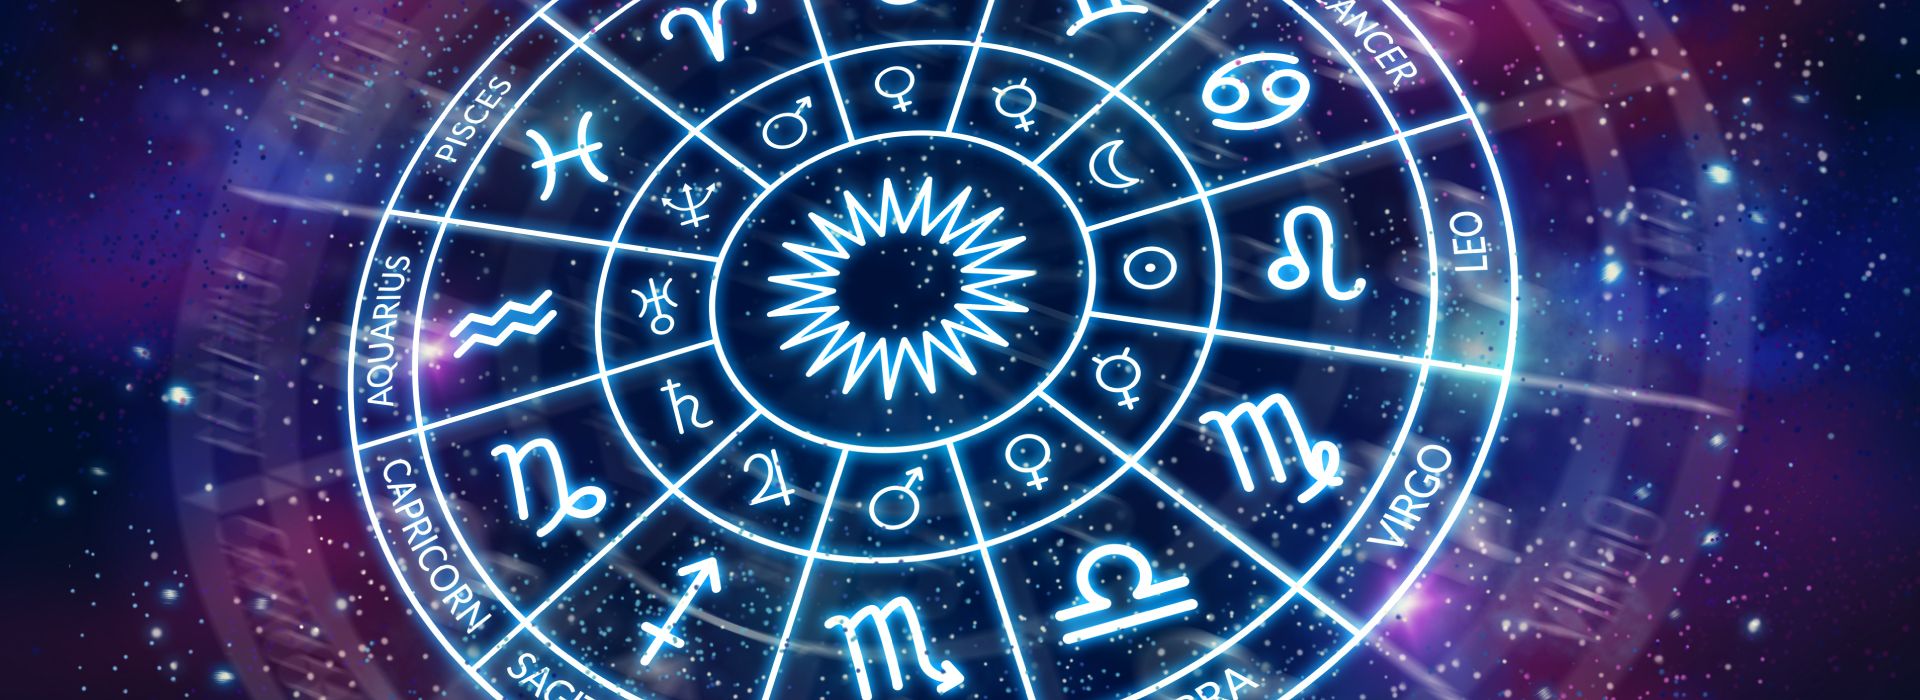 Zodiac wheel with glowing symbols and words for each sign.  Background of space is blue and purple with stars.